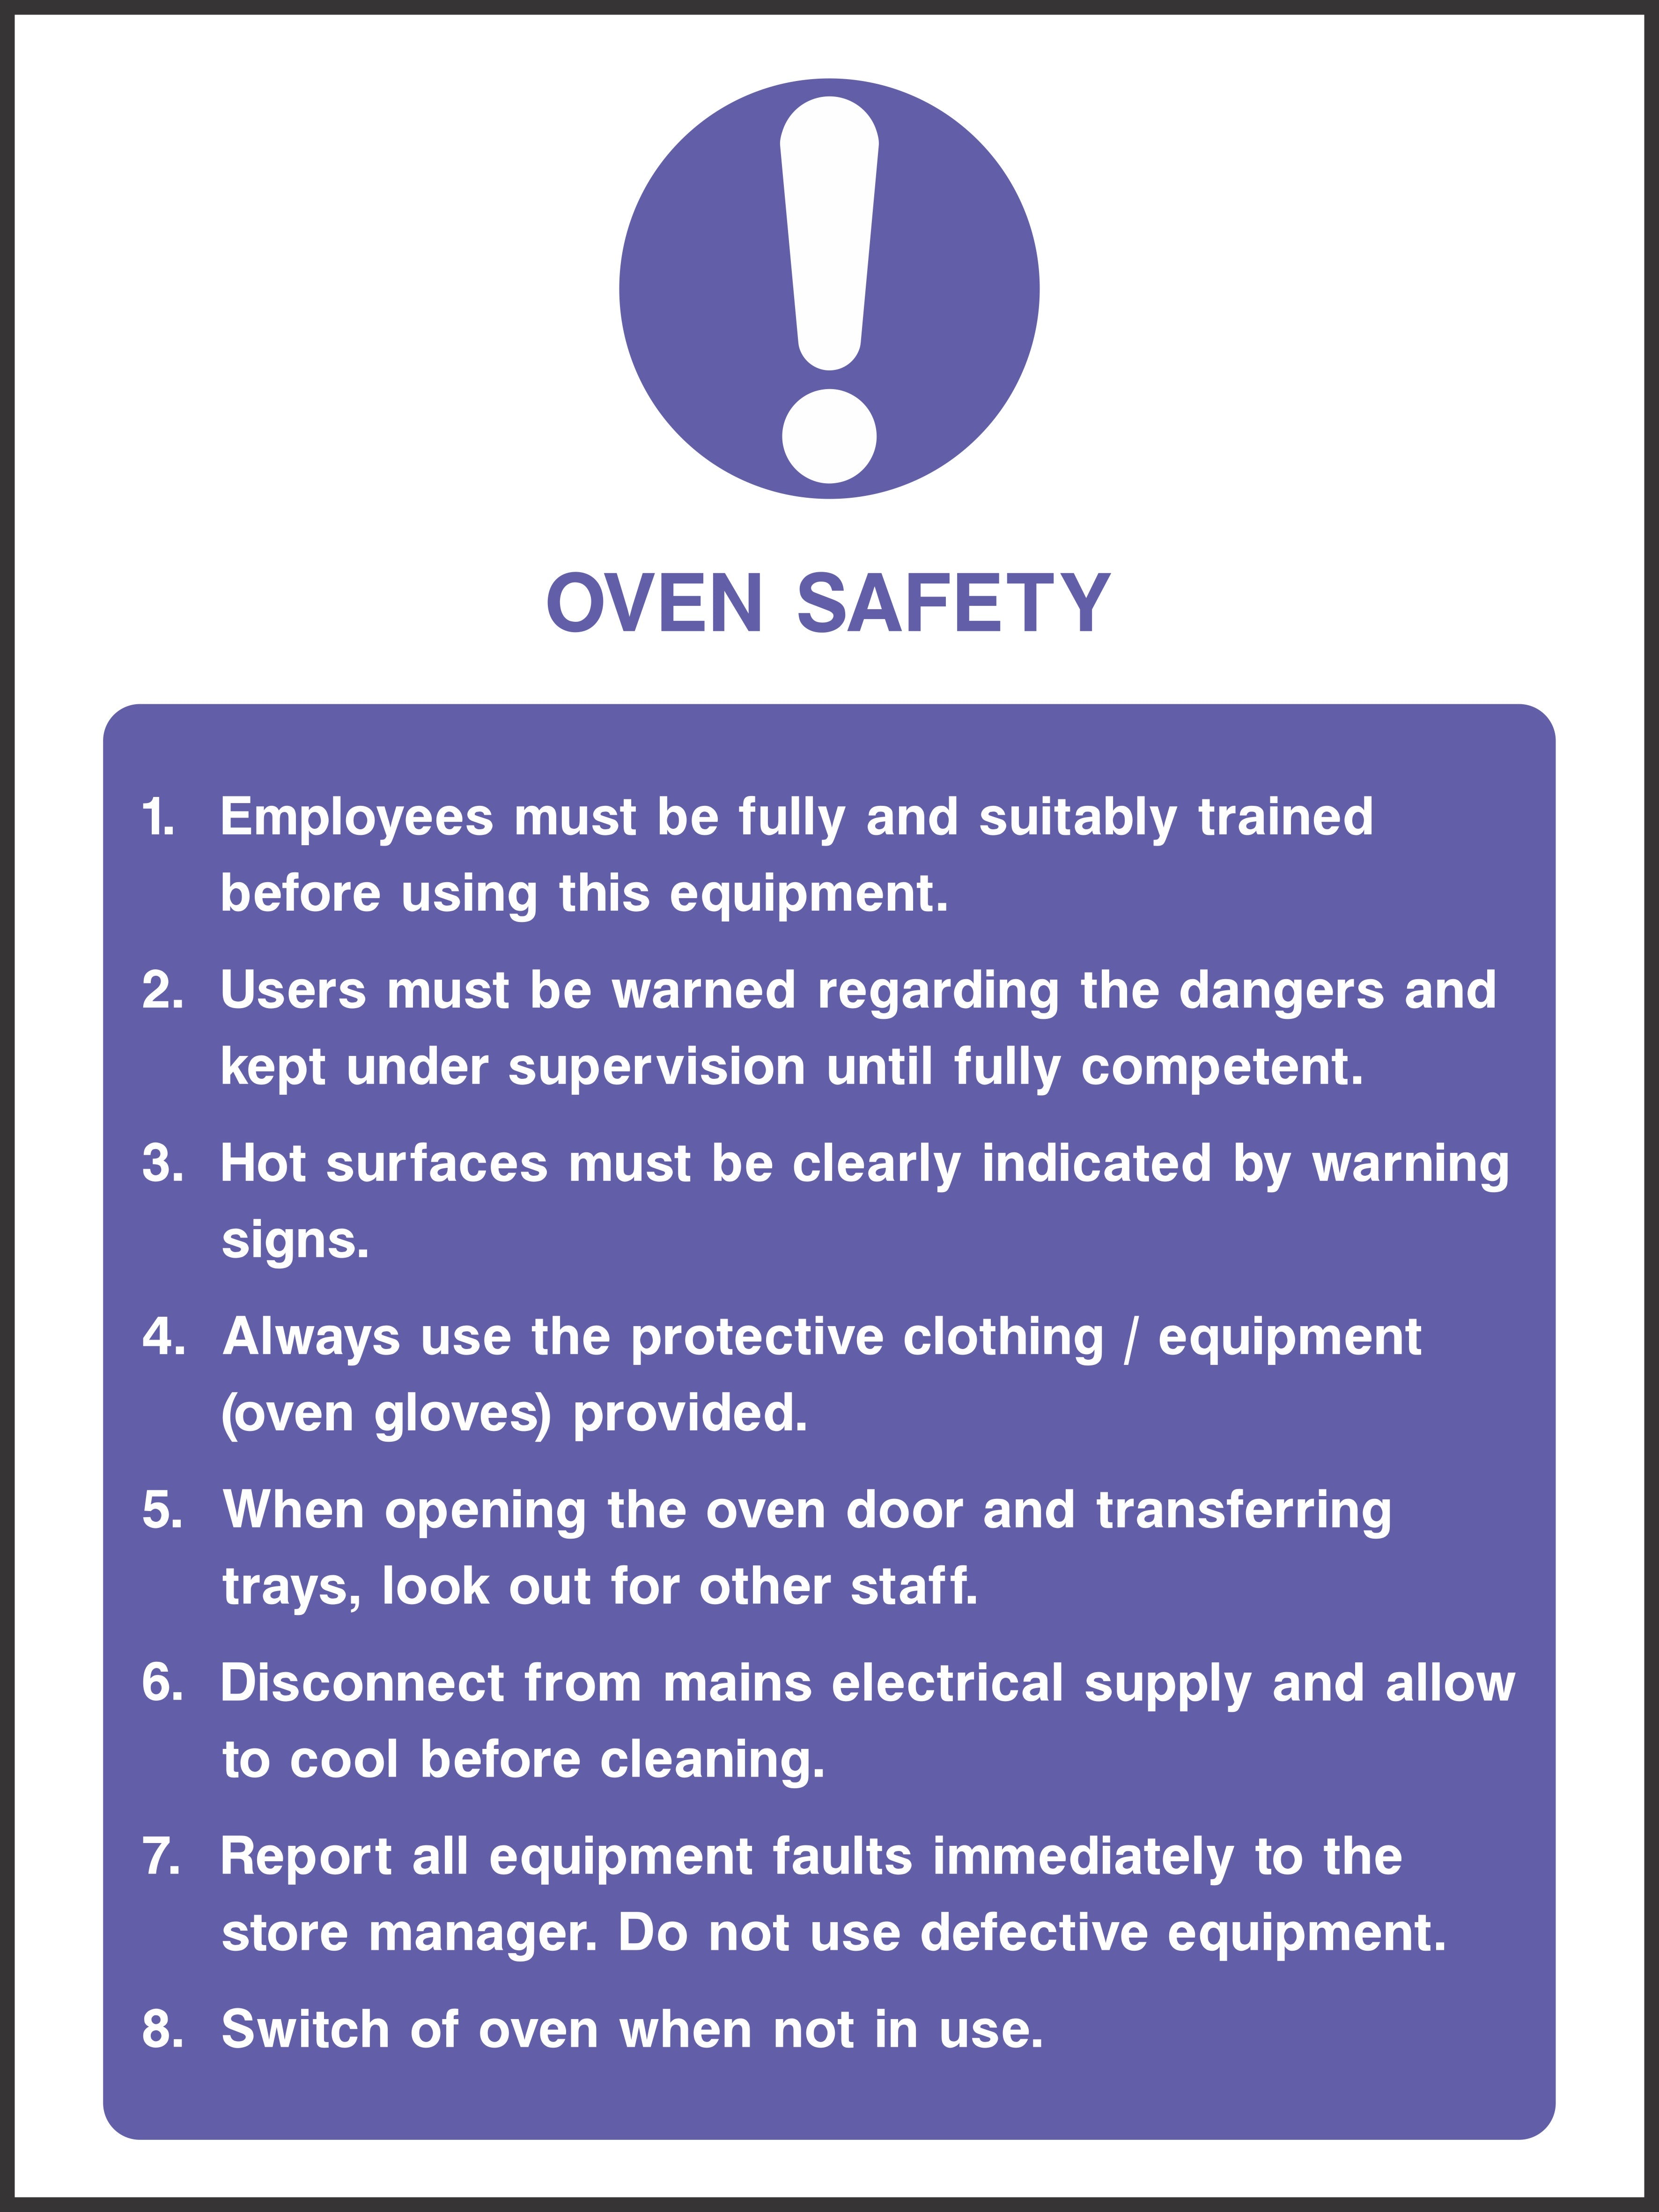 Oven safety sign